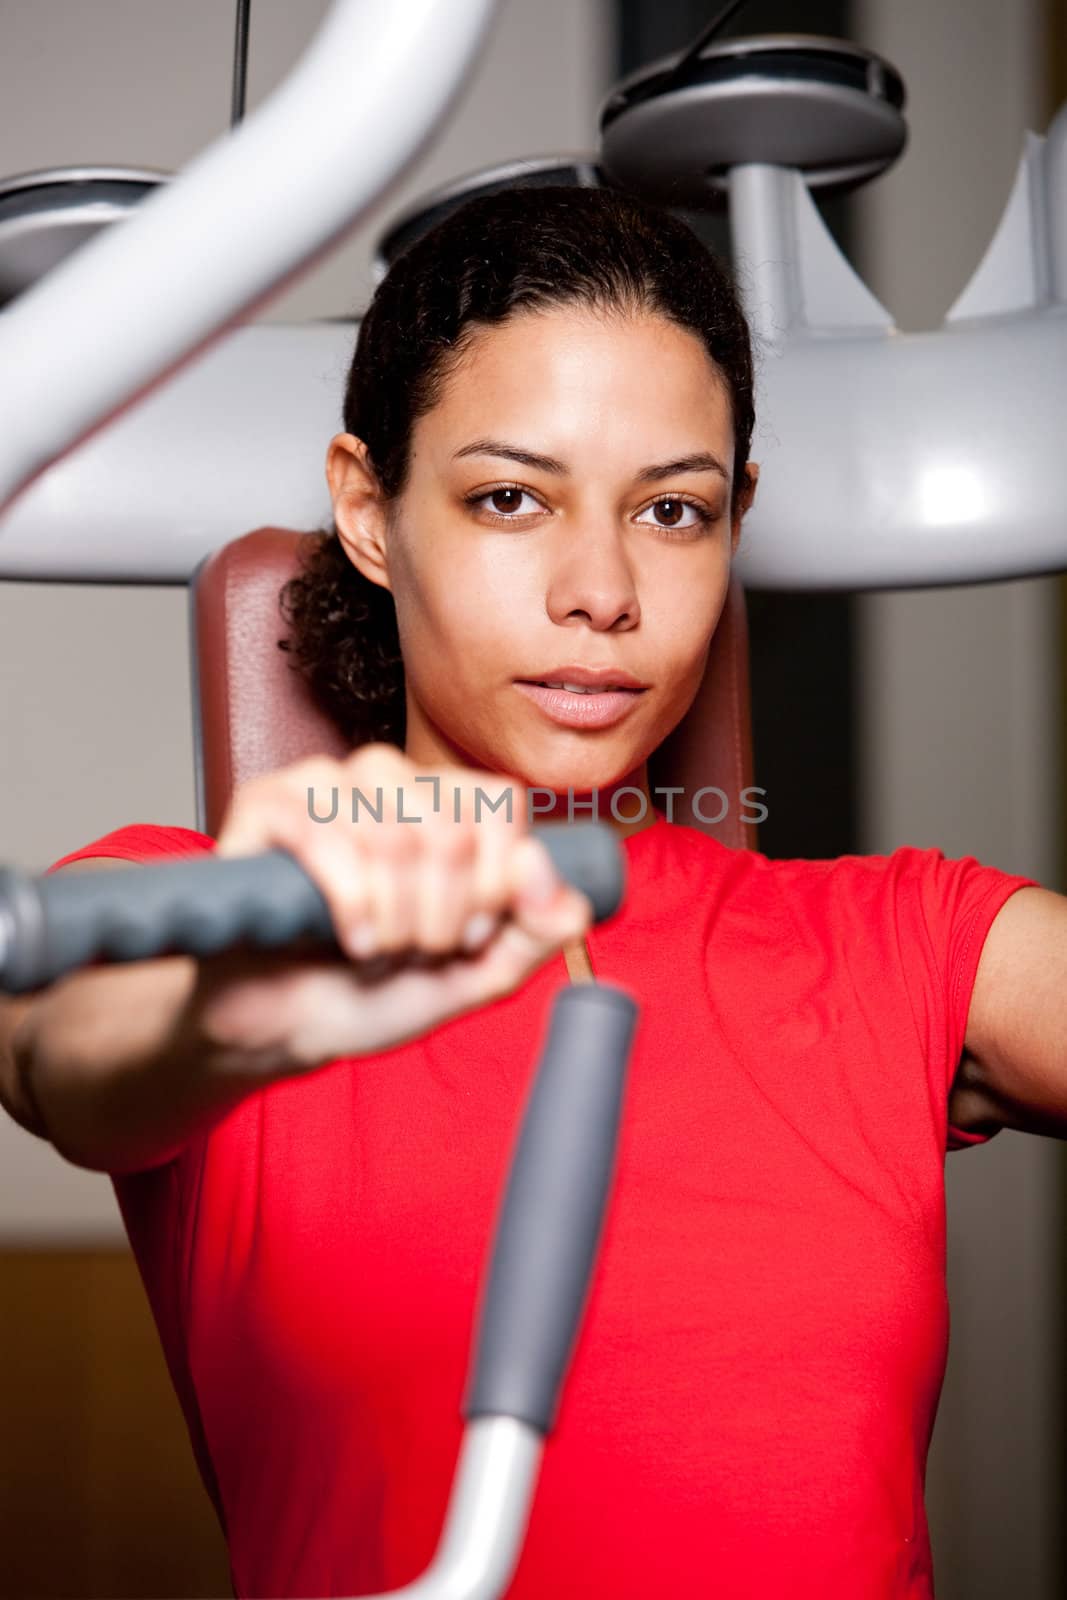 Beautiful girl working out at the gym by Fotosmurf